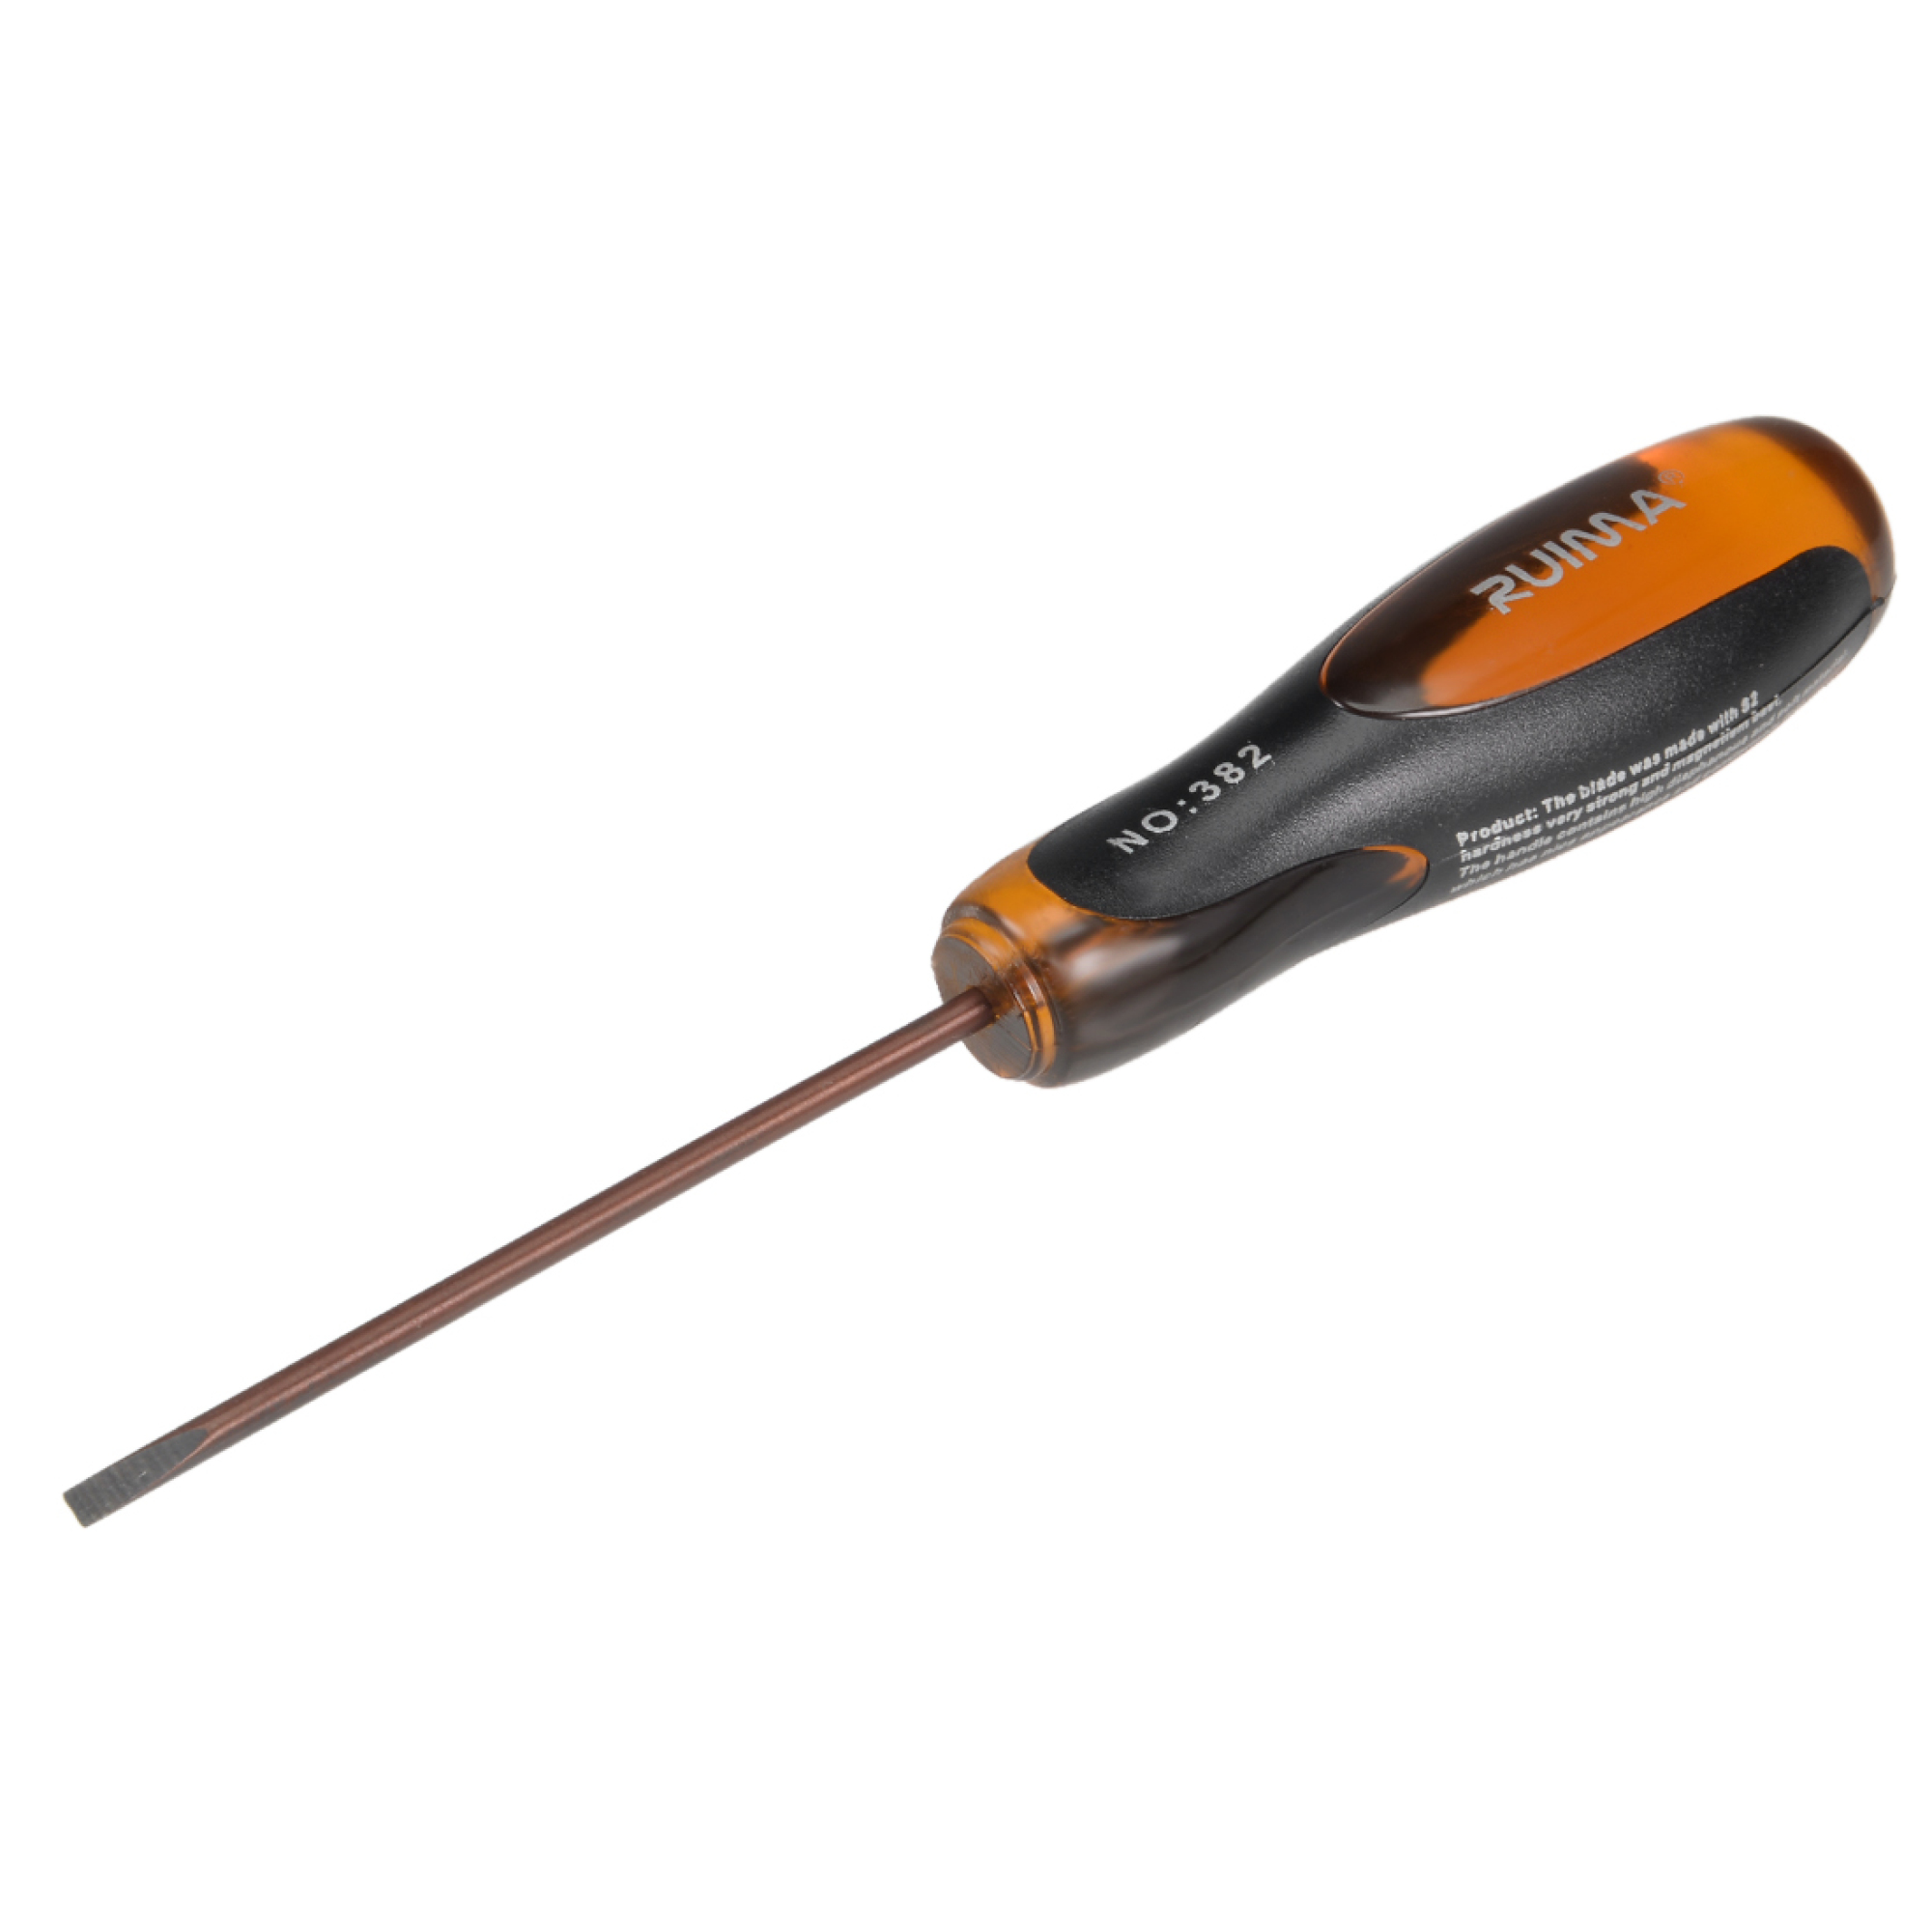 3mm Slotted Magnetic Screwdriver 3 Inch Round Shaft Grip